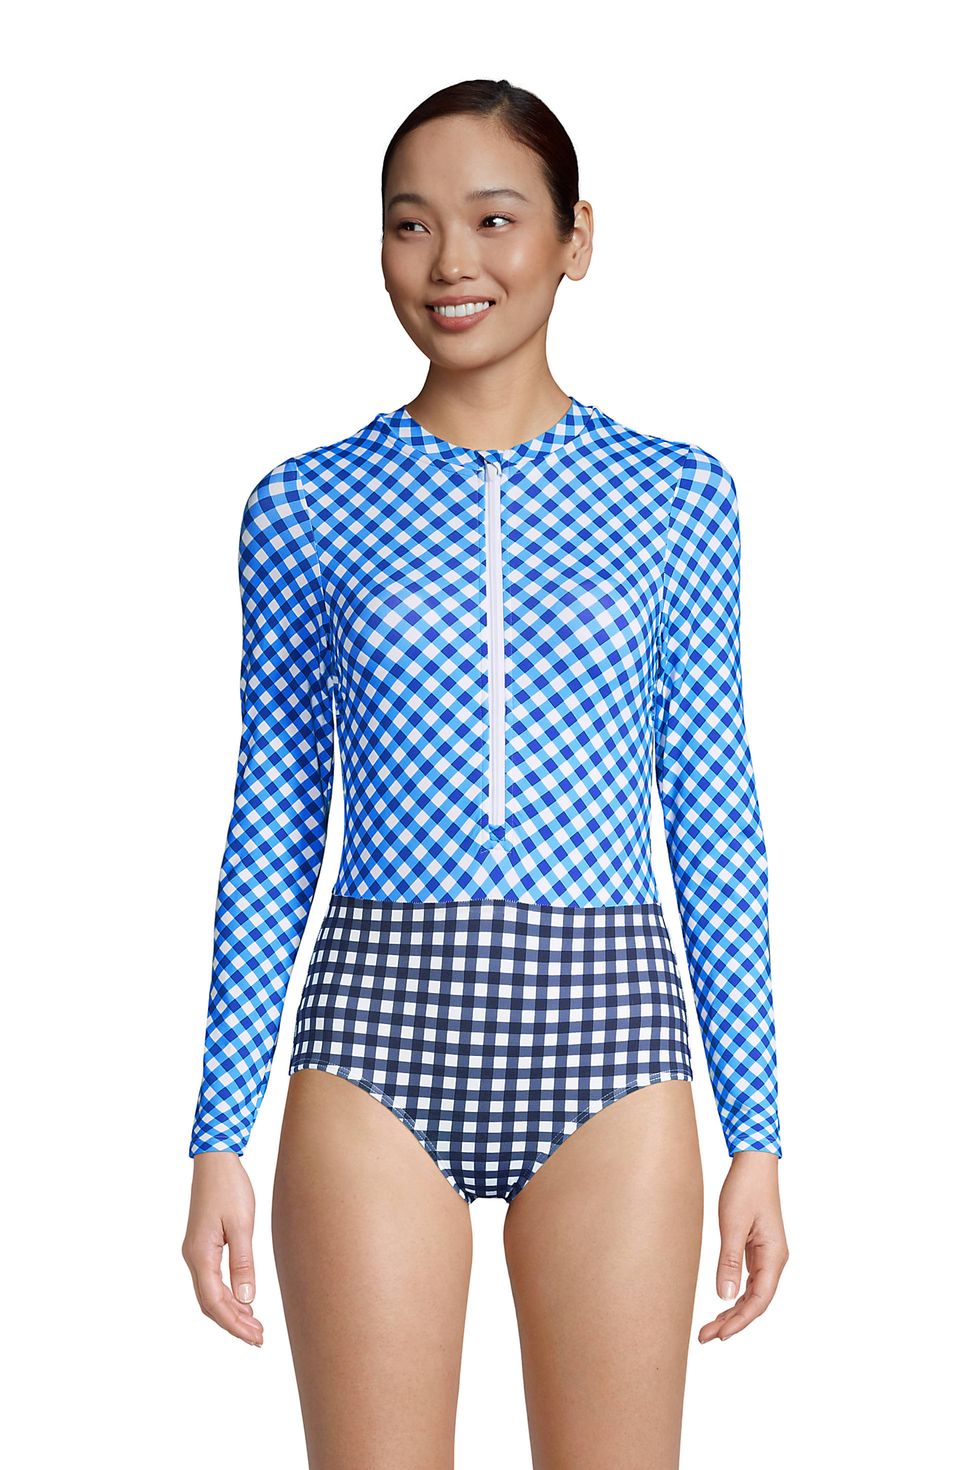 Editors' Picks: The 12 Best Swimsuits From Lands' End for All Body